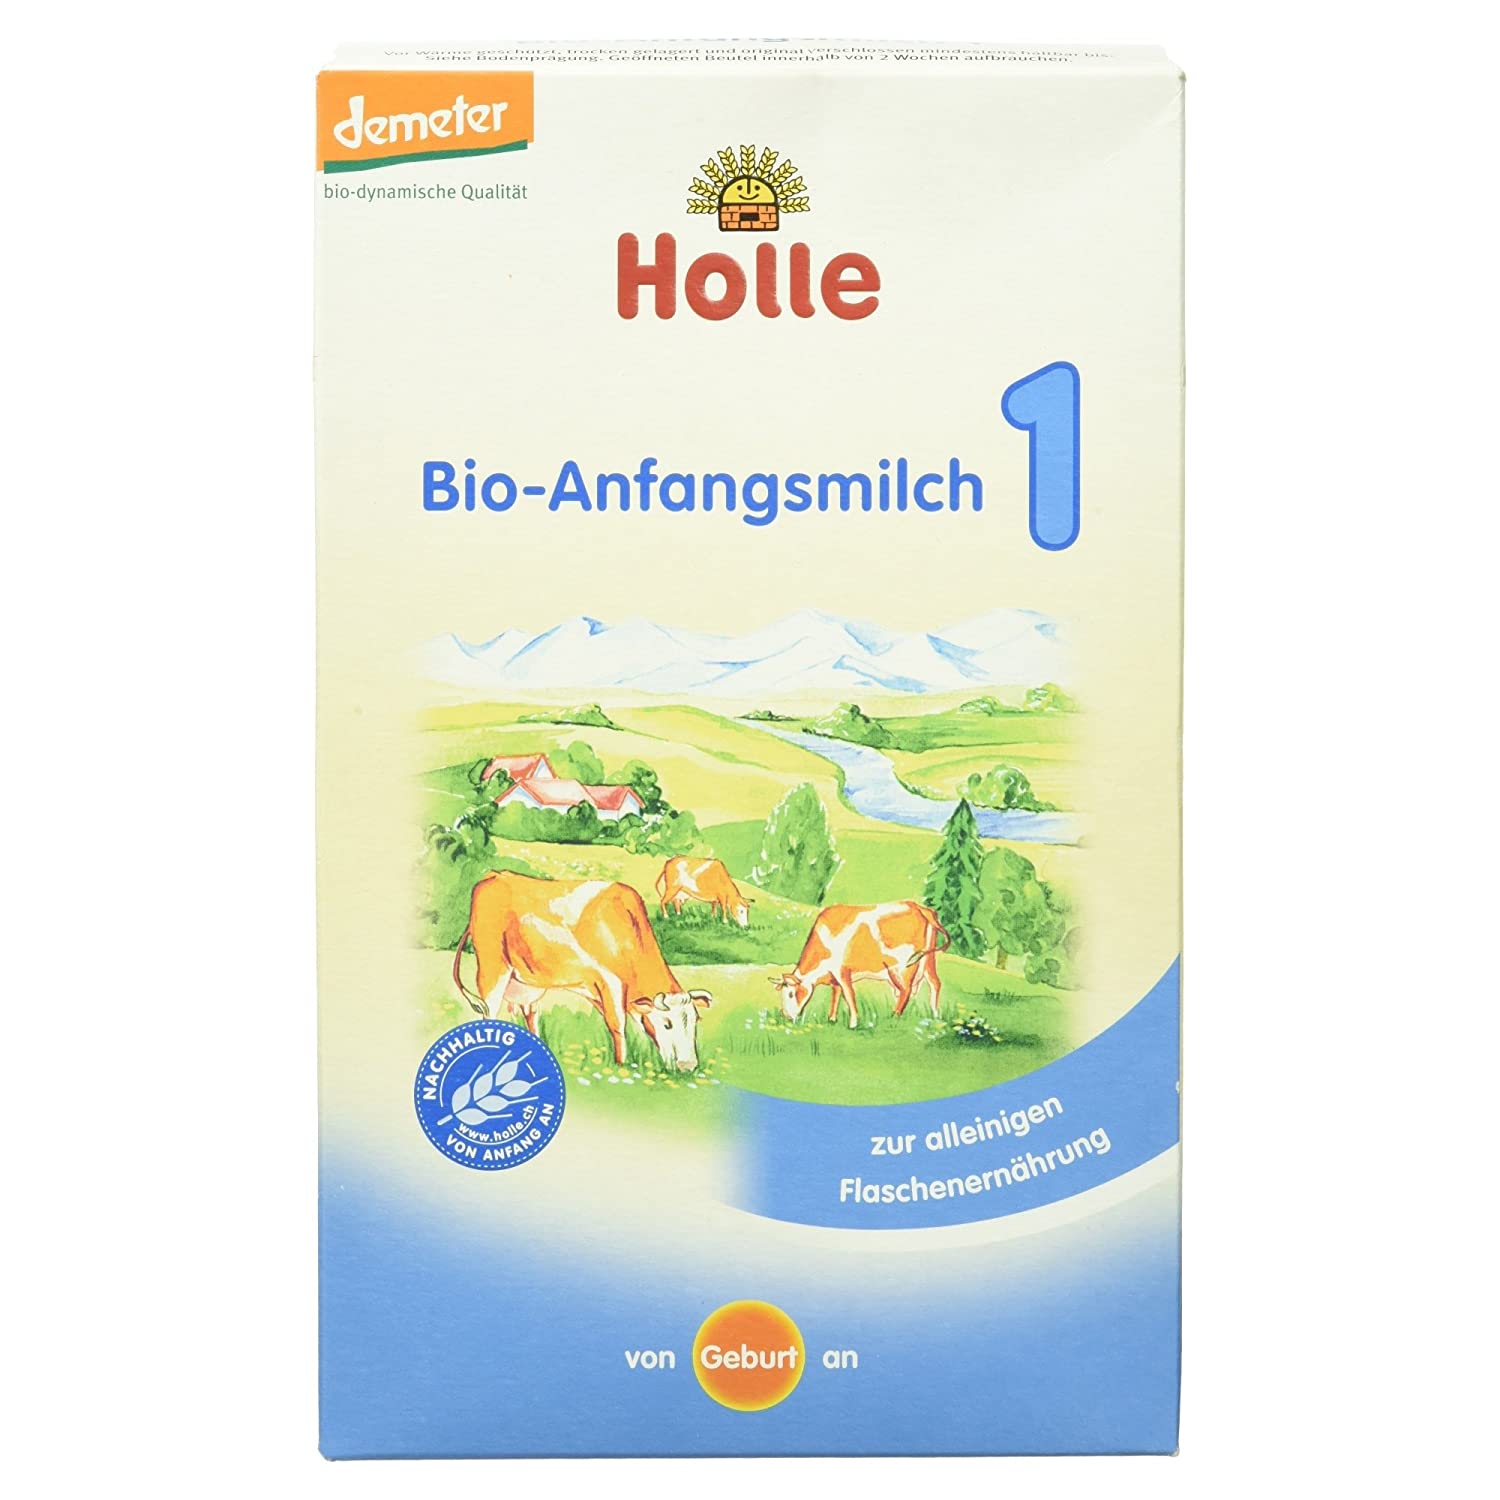 Holle Bio-Anfangsmilch 1, 1er Pack (1 x 400 g)